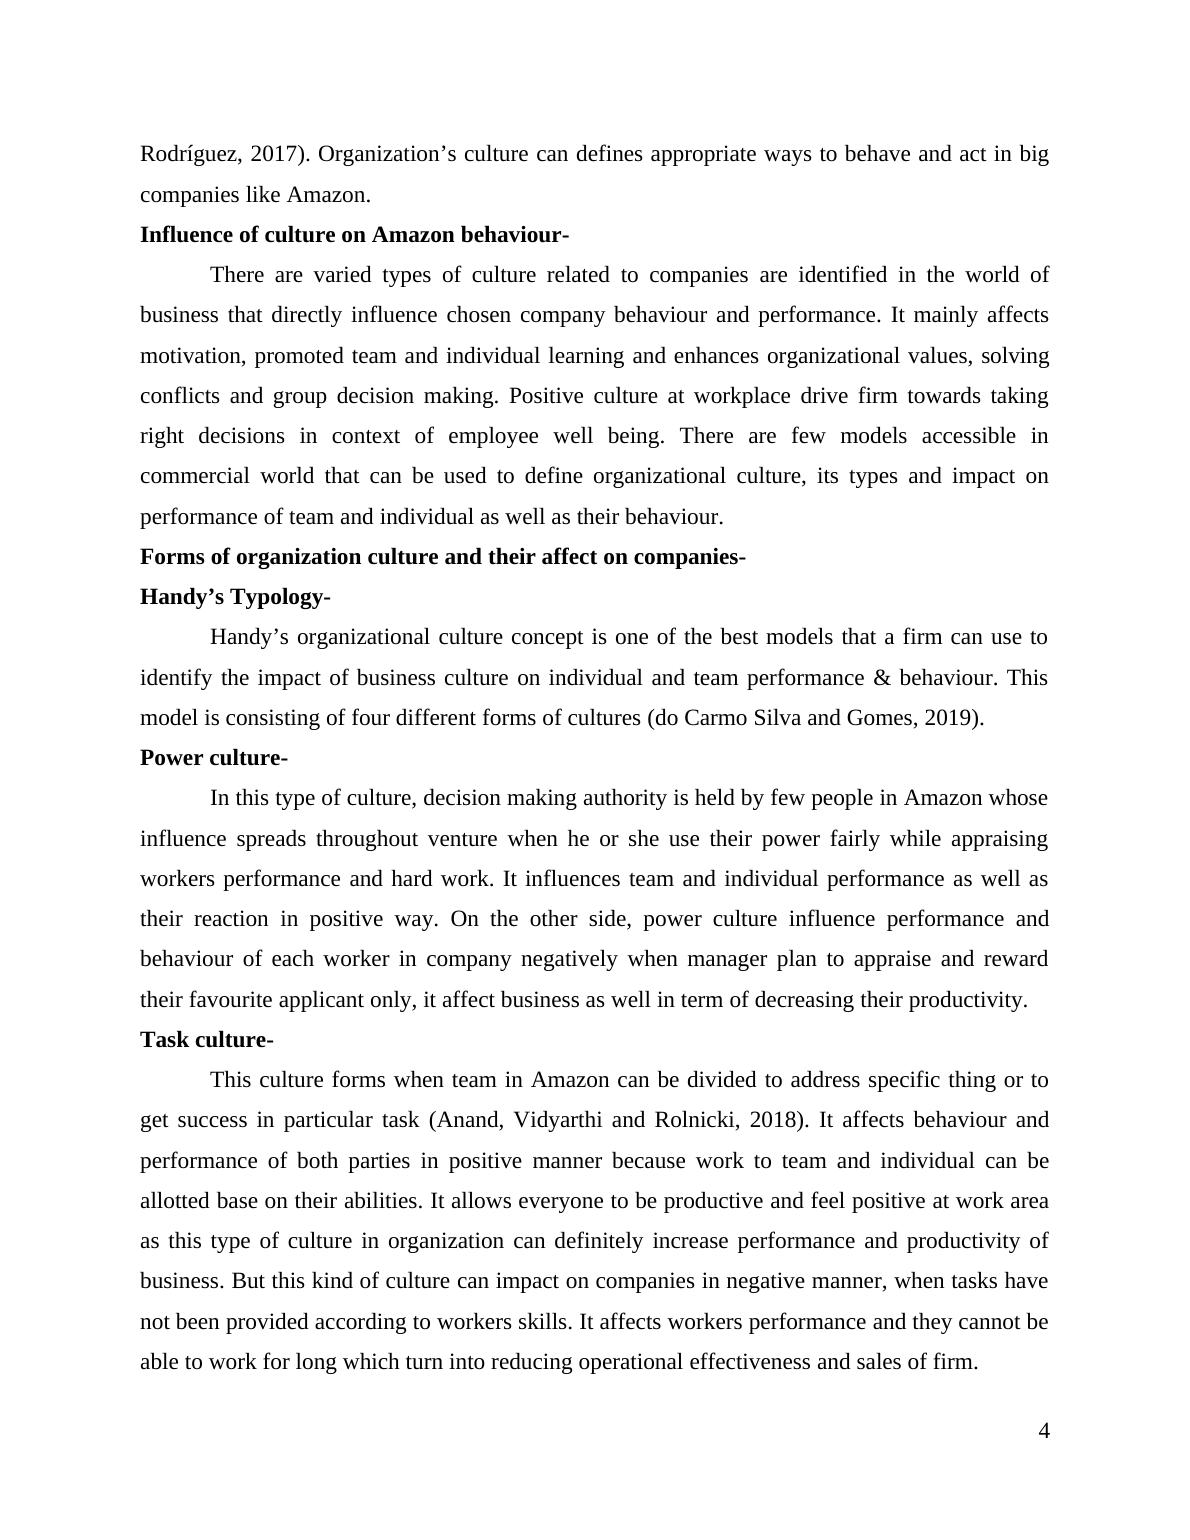 Organizational Behaviour: Impact of Power, Politics, and Culture on Behaviour and Performance in Amazon_4